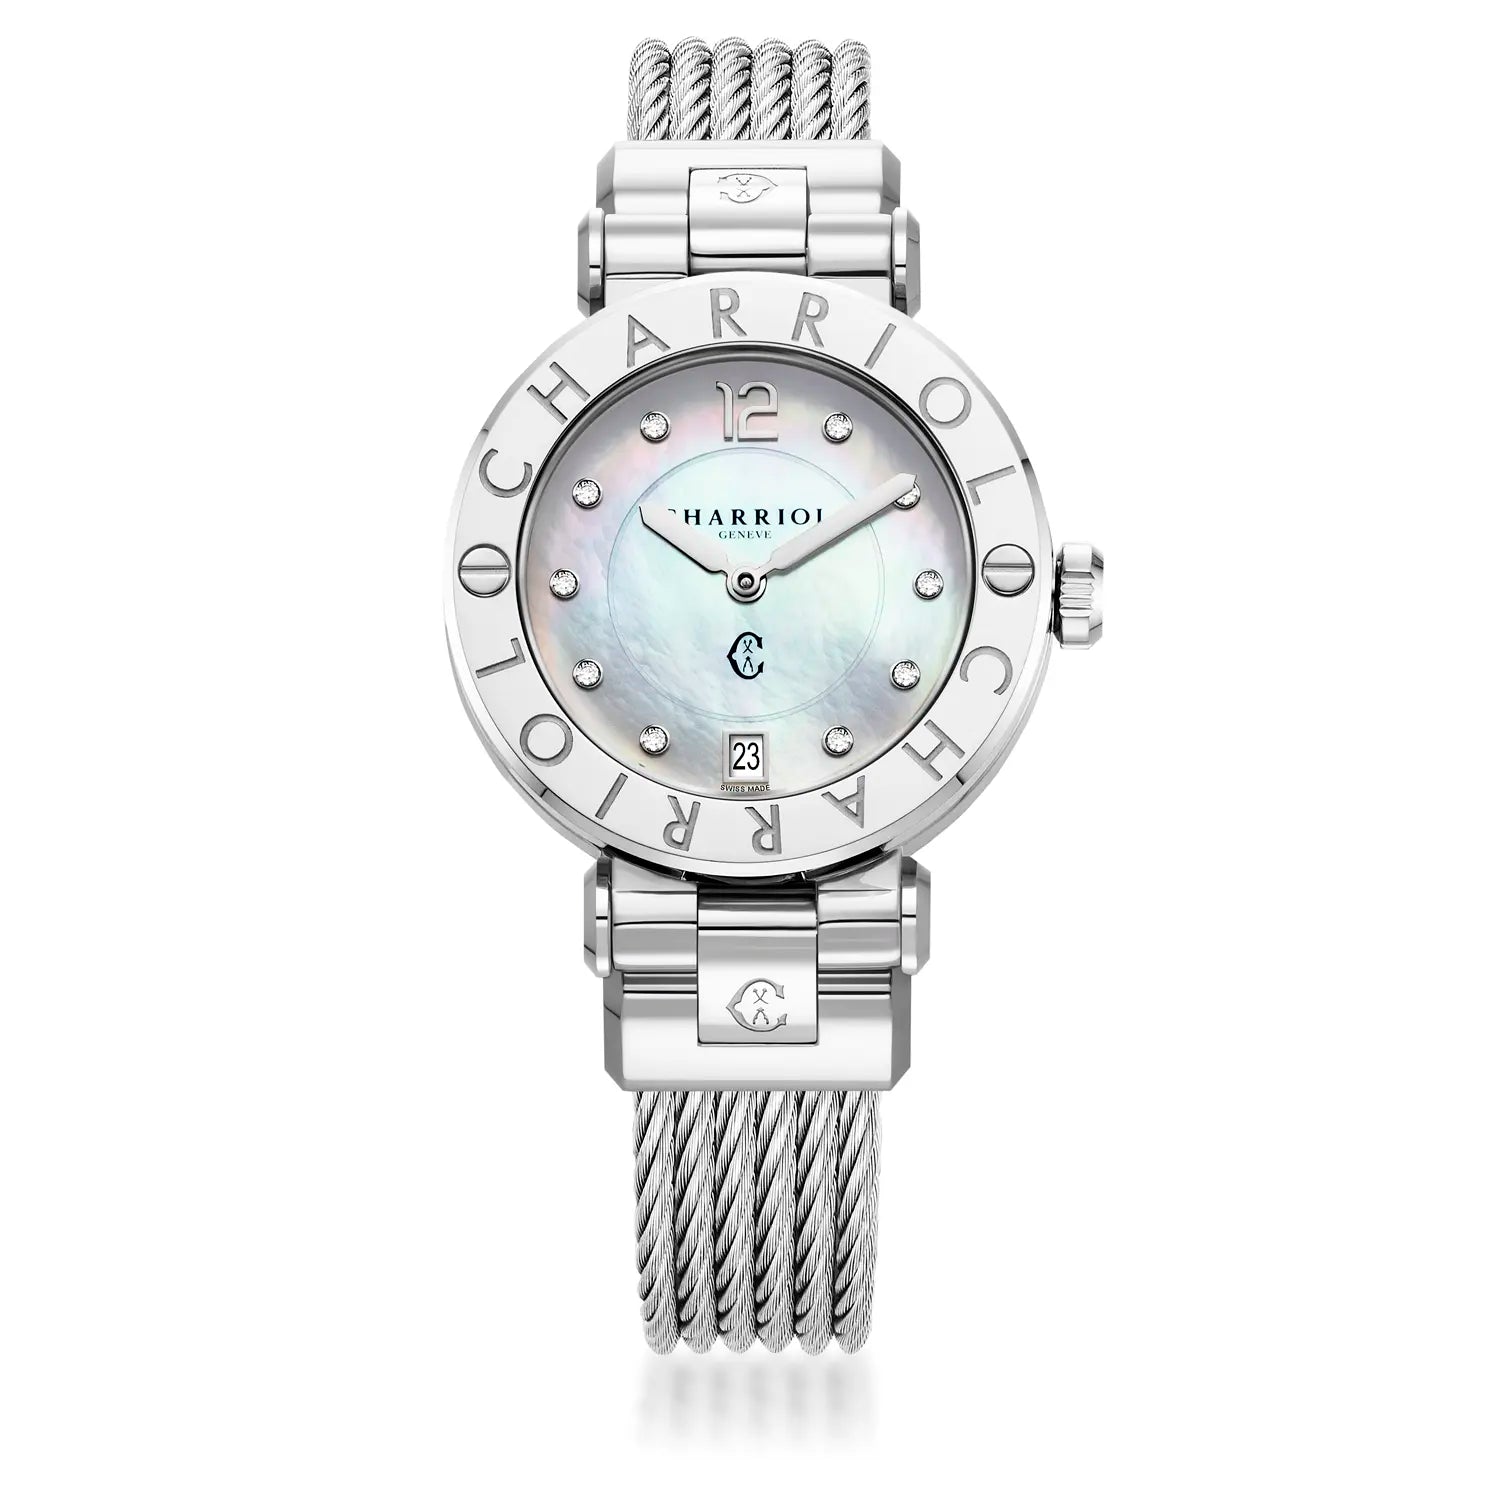 NAVIGATOR CRUISE, 36MM, QUARTZ CALIBRE, MOTHER-OF-PEARL WITH 10 DIAMONDS DIAL, "CHARRIOL CHARRIOL" BEZEL, STEEL CABLE INTERCHEANGEABLE STRAP - Charriol Geneve -  Watch